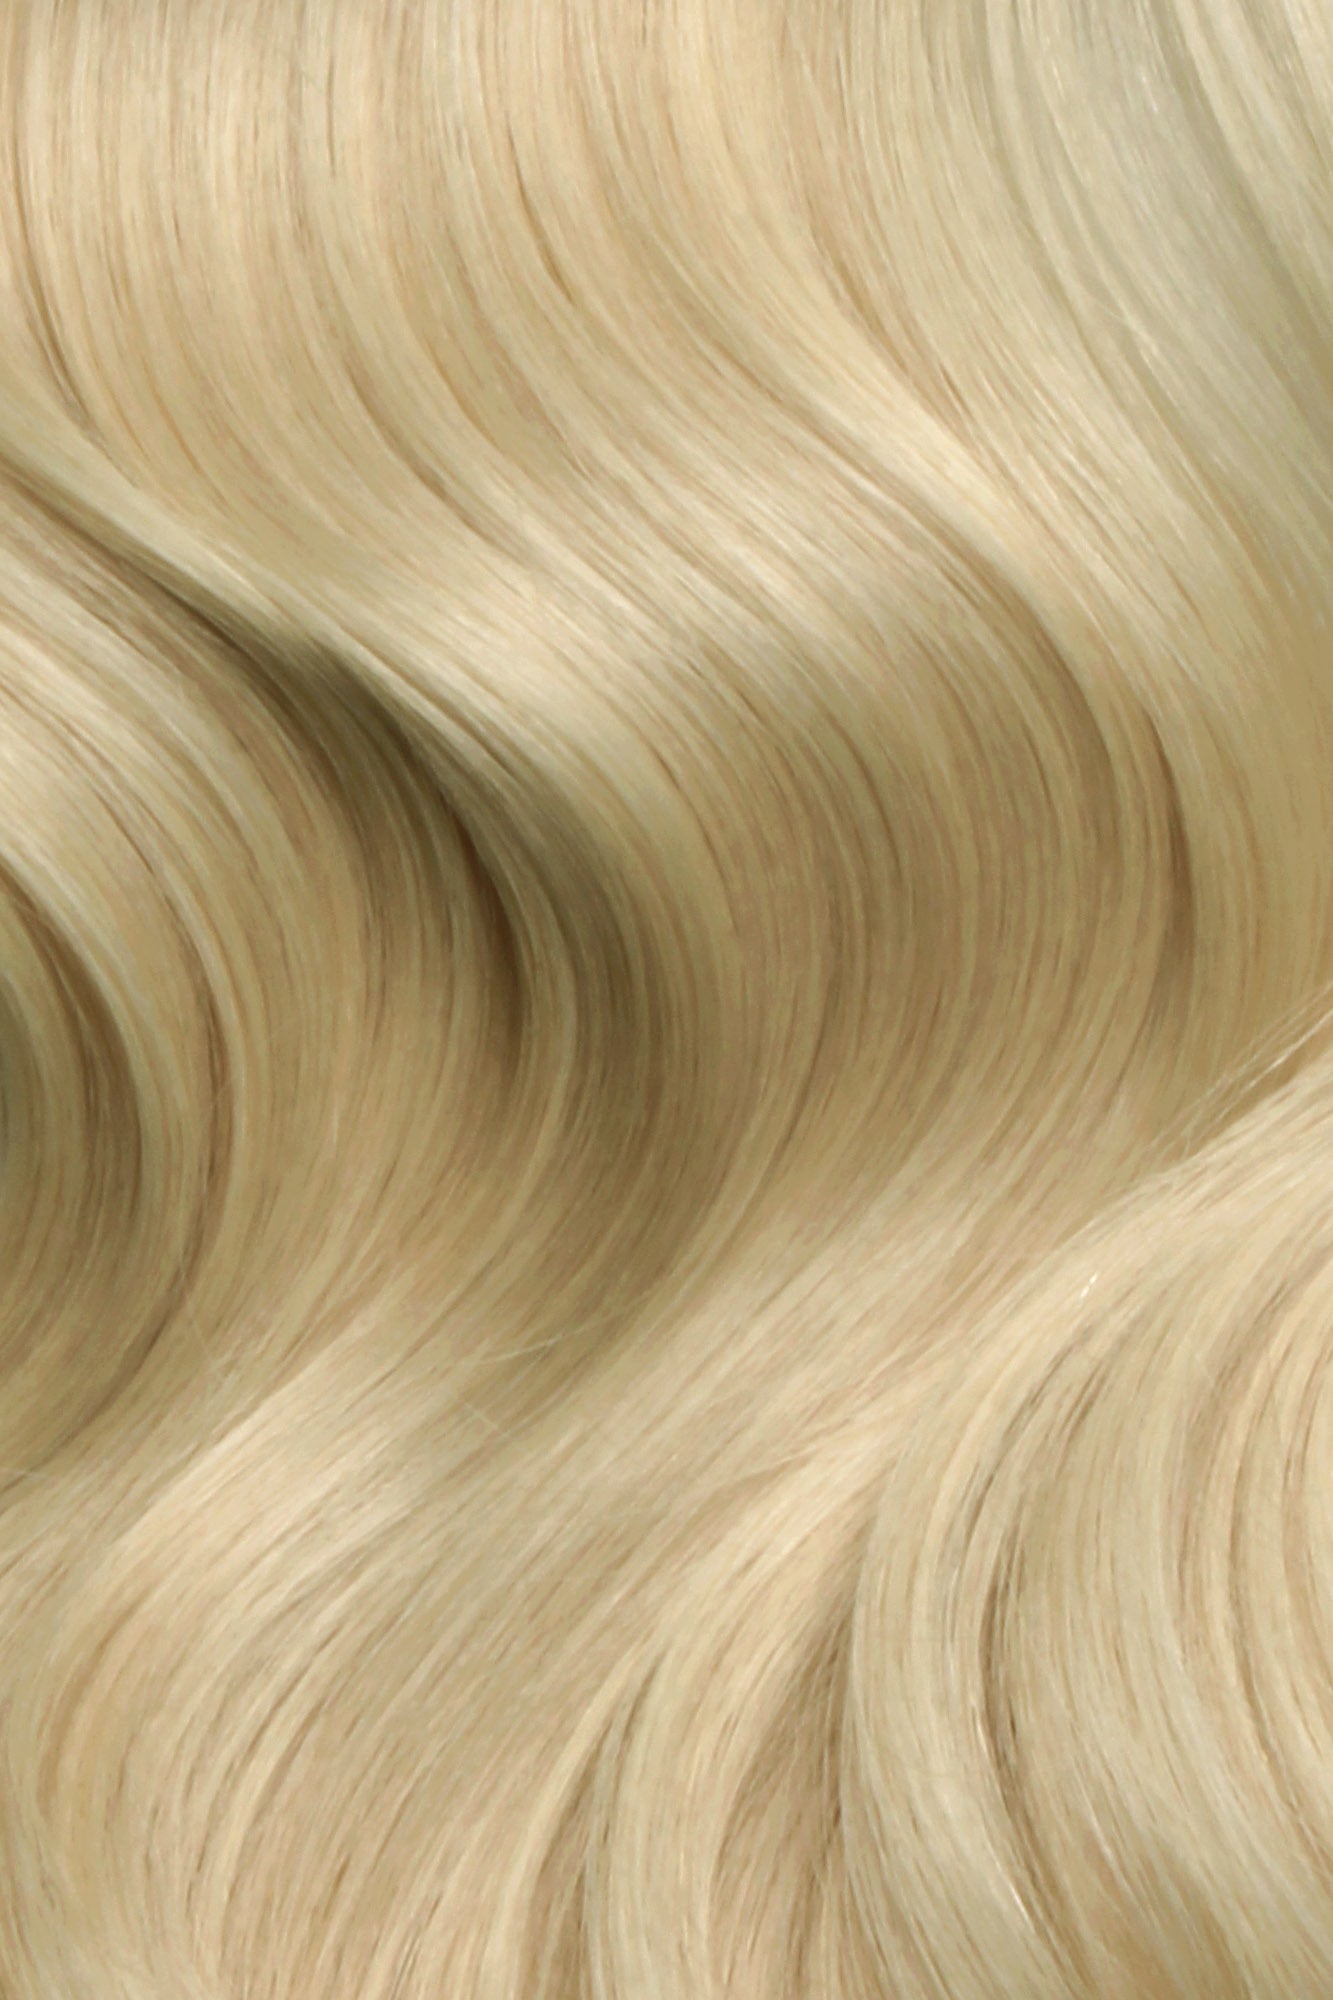 Nano Bonds 22 Inches - SWAY Hair Extensions Honey-Blonde-613 Ultra-fine, invisible bonds for a flawless, natural look. 100% Remy Human hair, lightweight and versatile. Reusable and perfect for individual or salon use.